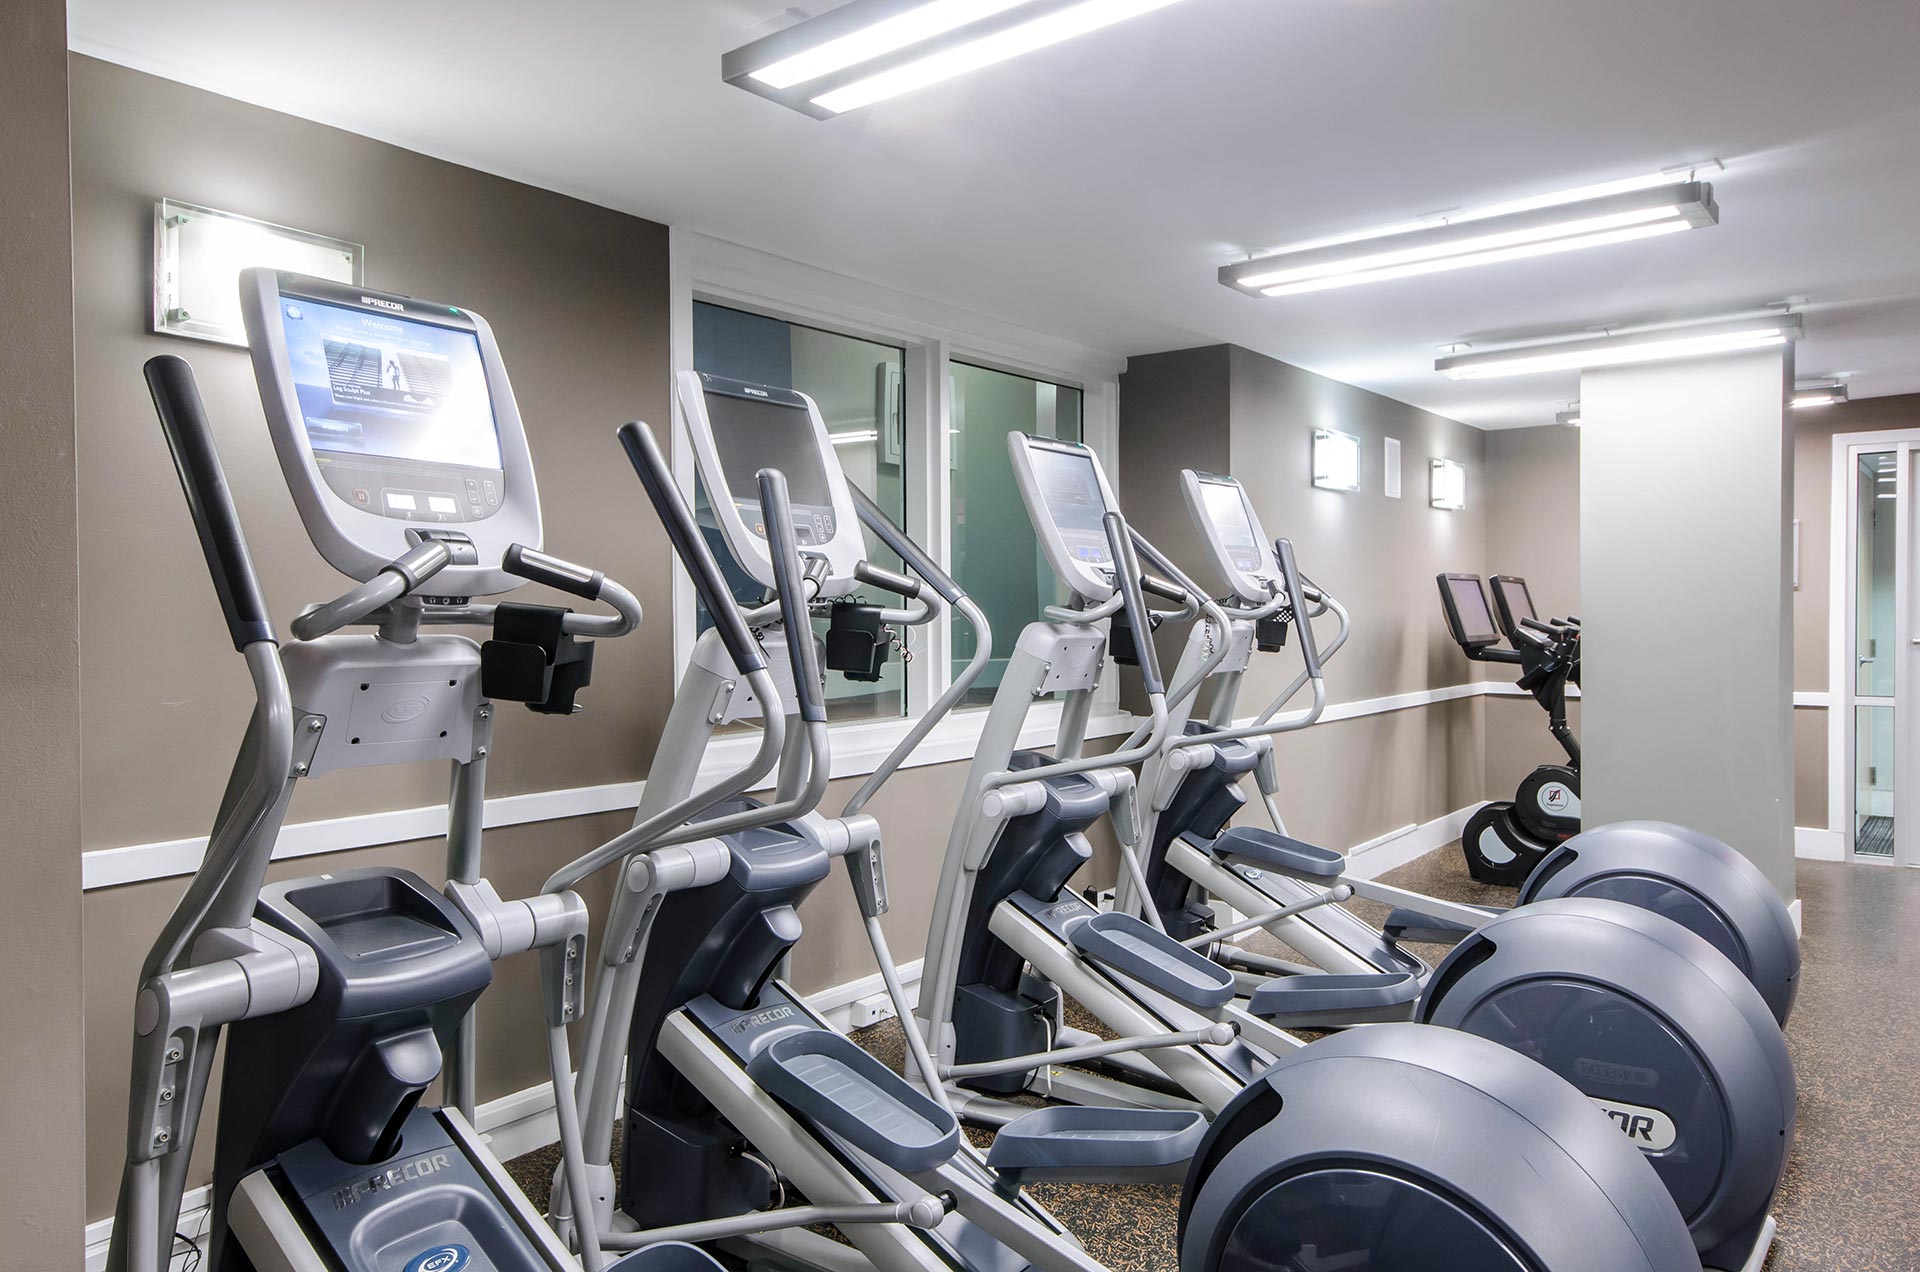 Closeup shot of elliptical machines in the fitness room